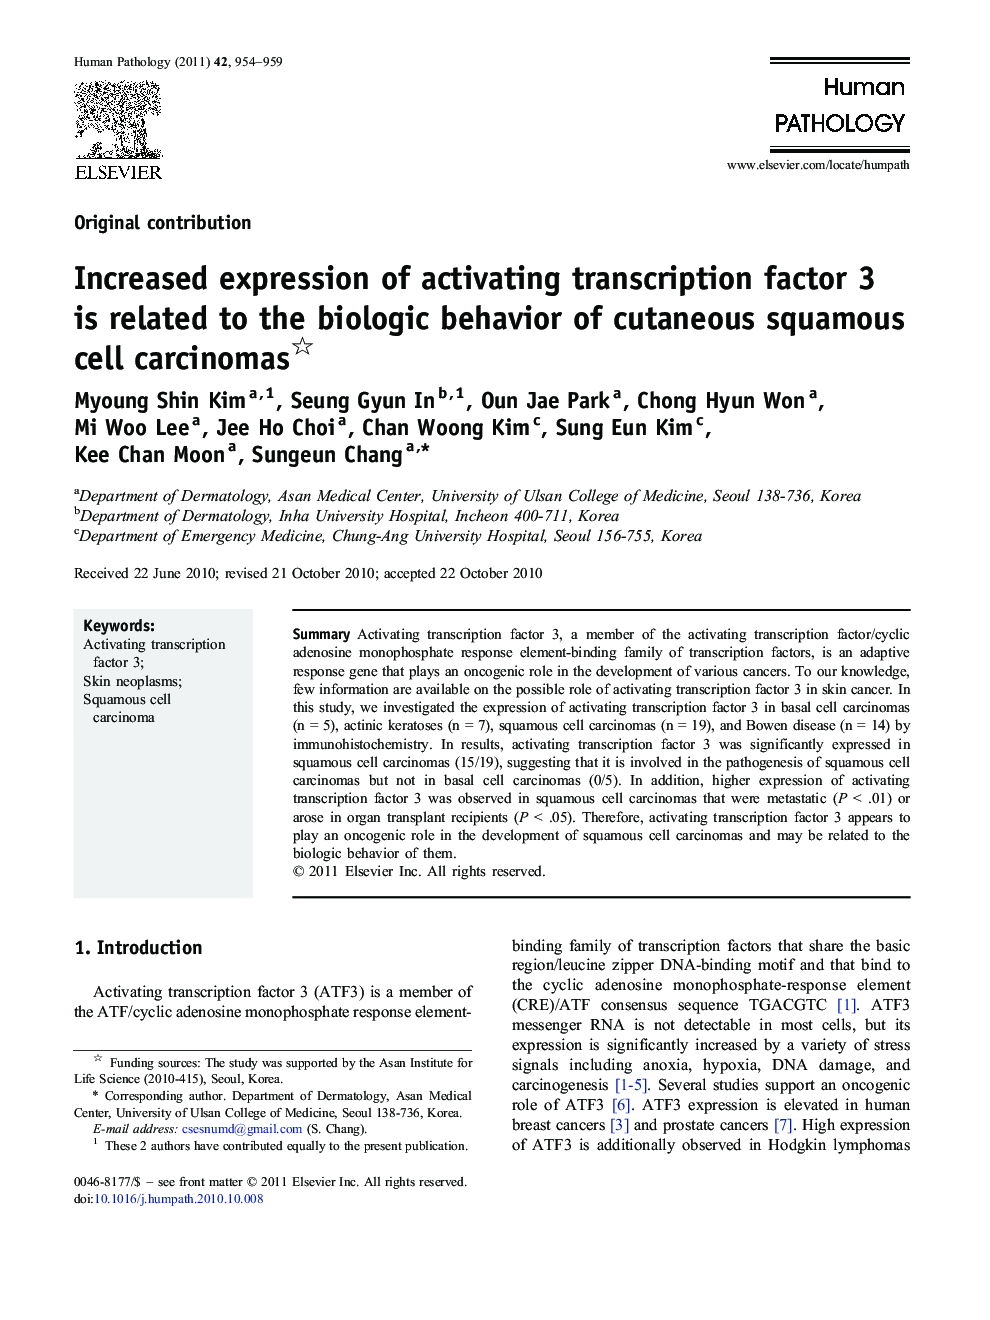 Increased expression of activating transcription factor 3 is related to the biologic behavior of cutaneous squamous cell carcinomas 